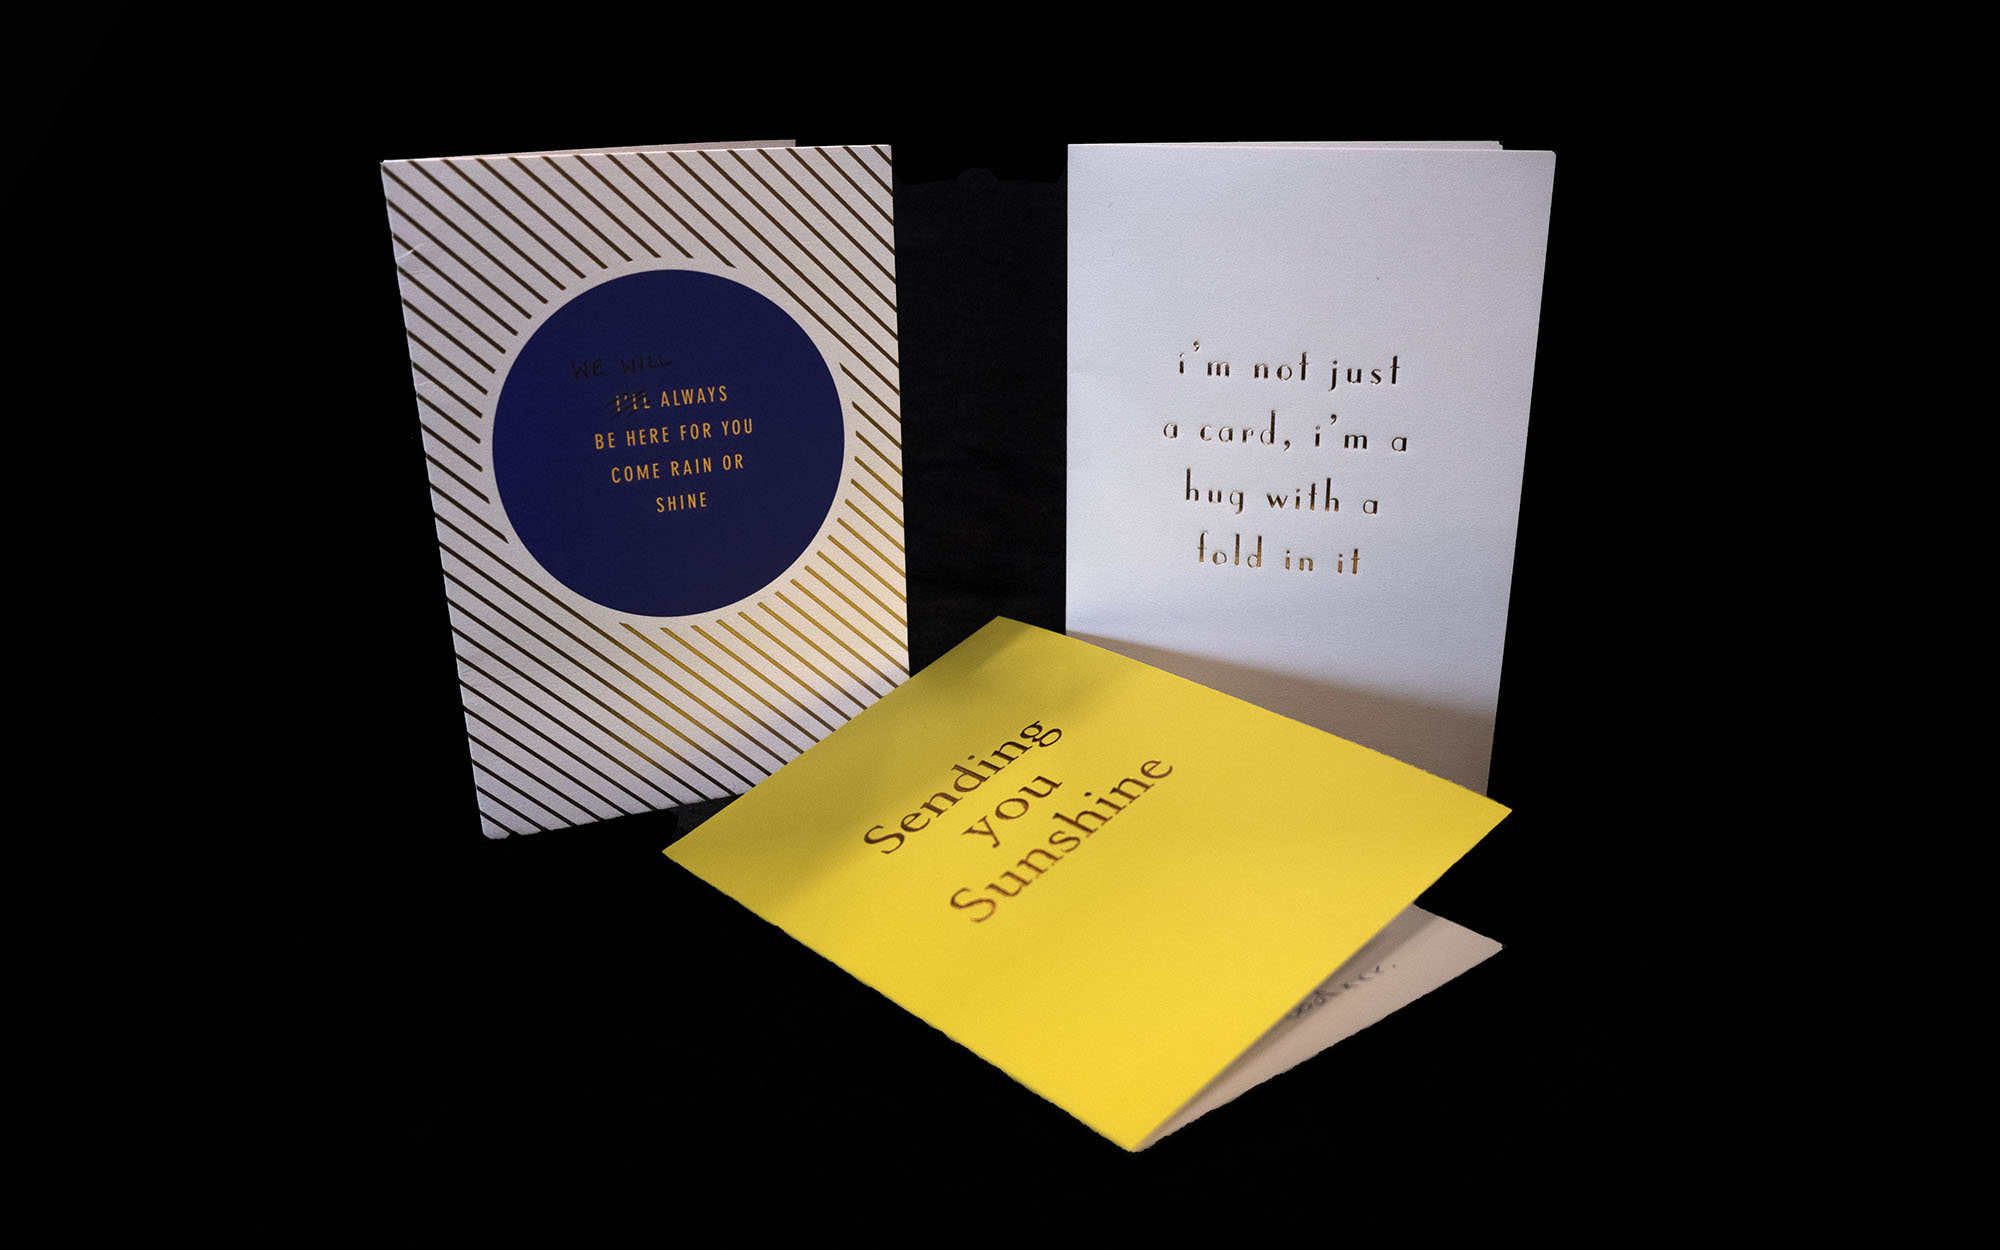 Three greeting cards: one says "Sending you sunshine", another one says "I'm not just a card, I'm a hug with a fold in it", and the other says "I'll always be here for you come rain or shine" with "I'll" crossed out and written "we will"